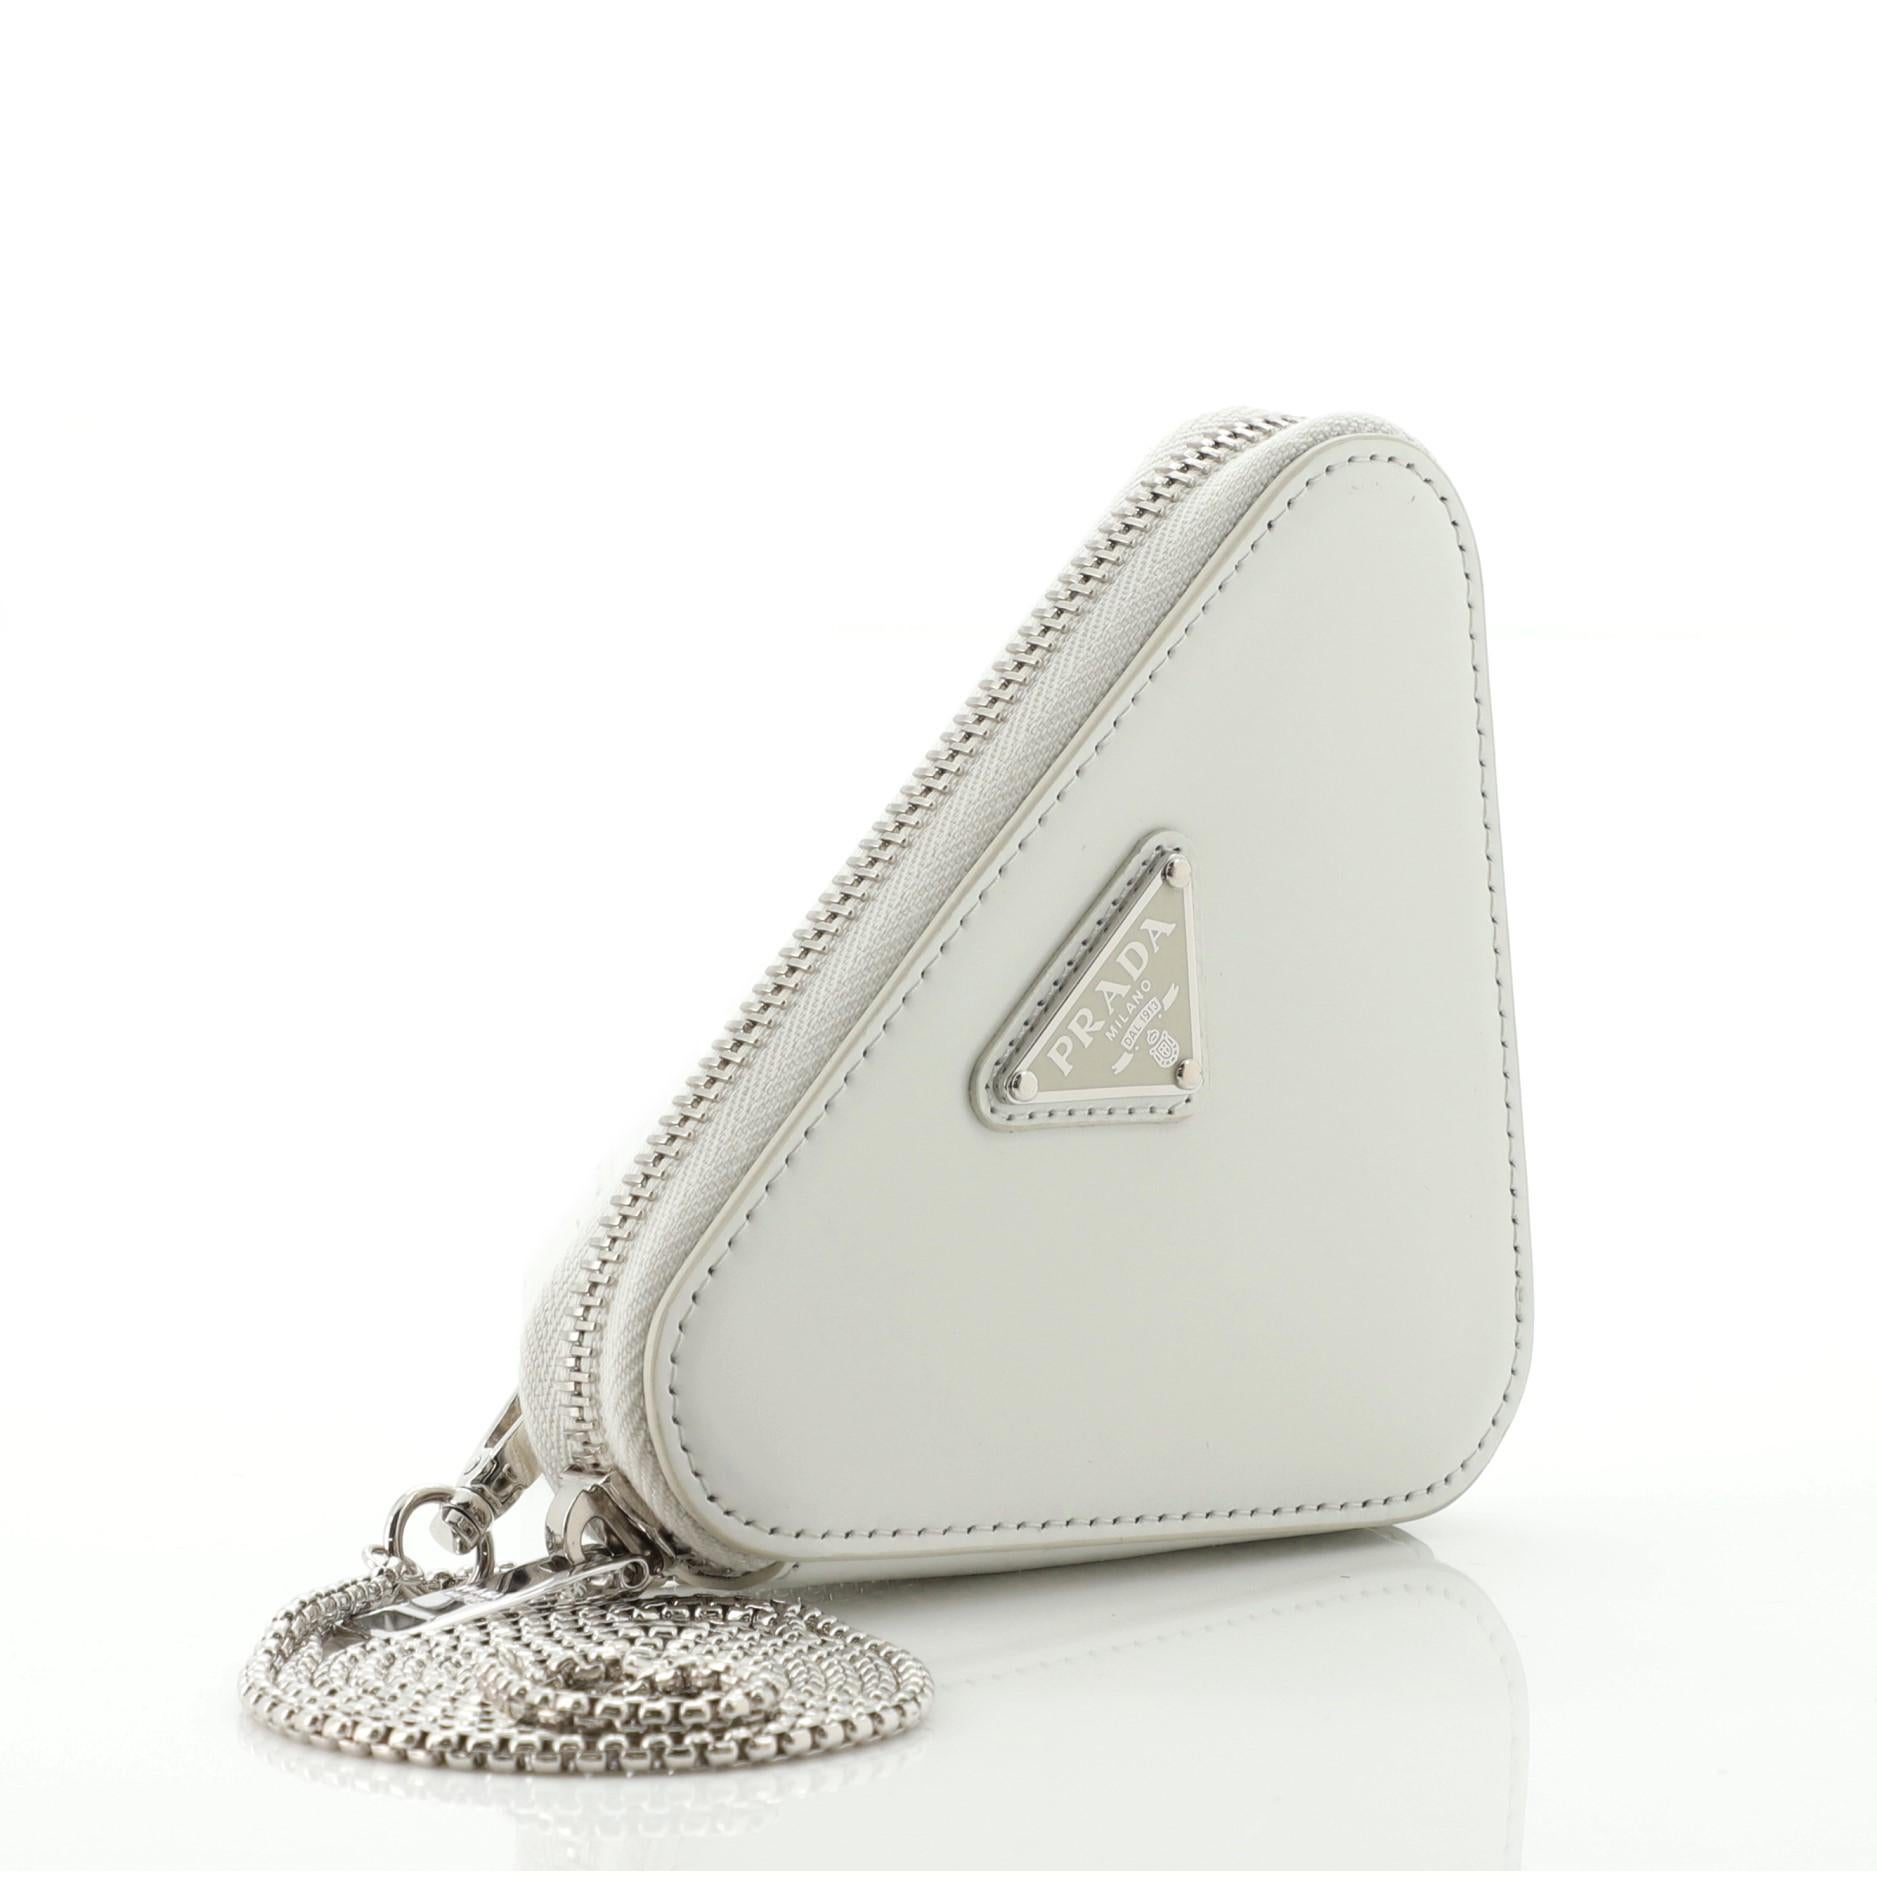 Gray Prada Triangle Pouch Bag with Chain Brushed Leather Mini